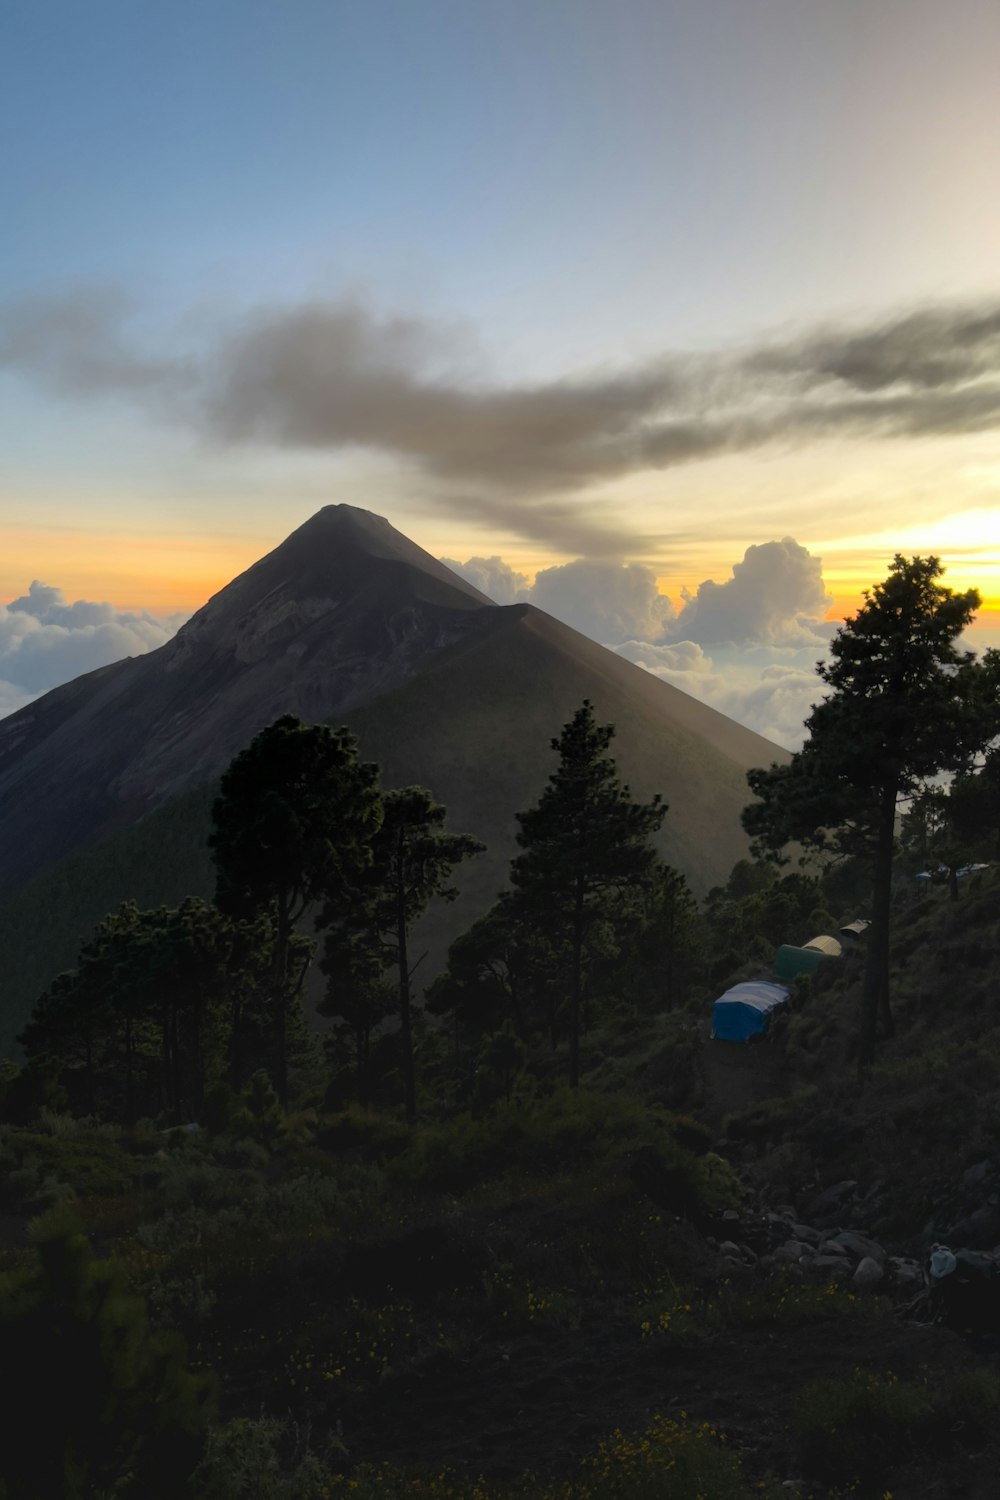 the sun is setting over a mountain with a tent in the foreground